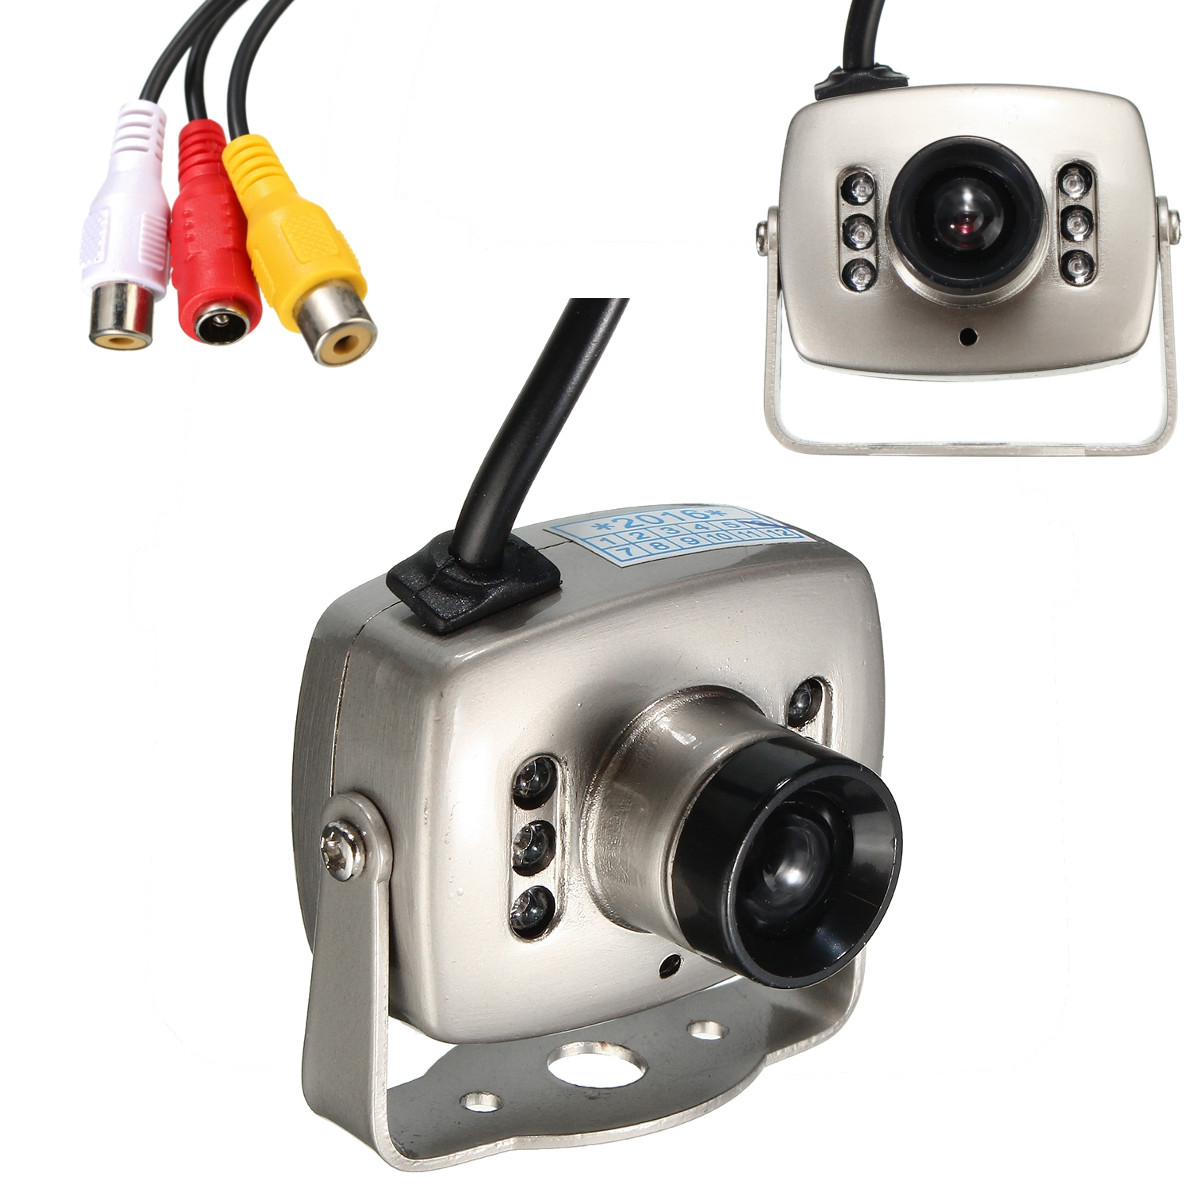 6-LED-Mini-Wired-Infrared-CMOS-CCTV-Camera-Security--Color-Night-Vision-1108055-1